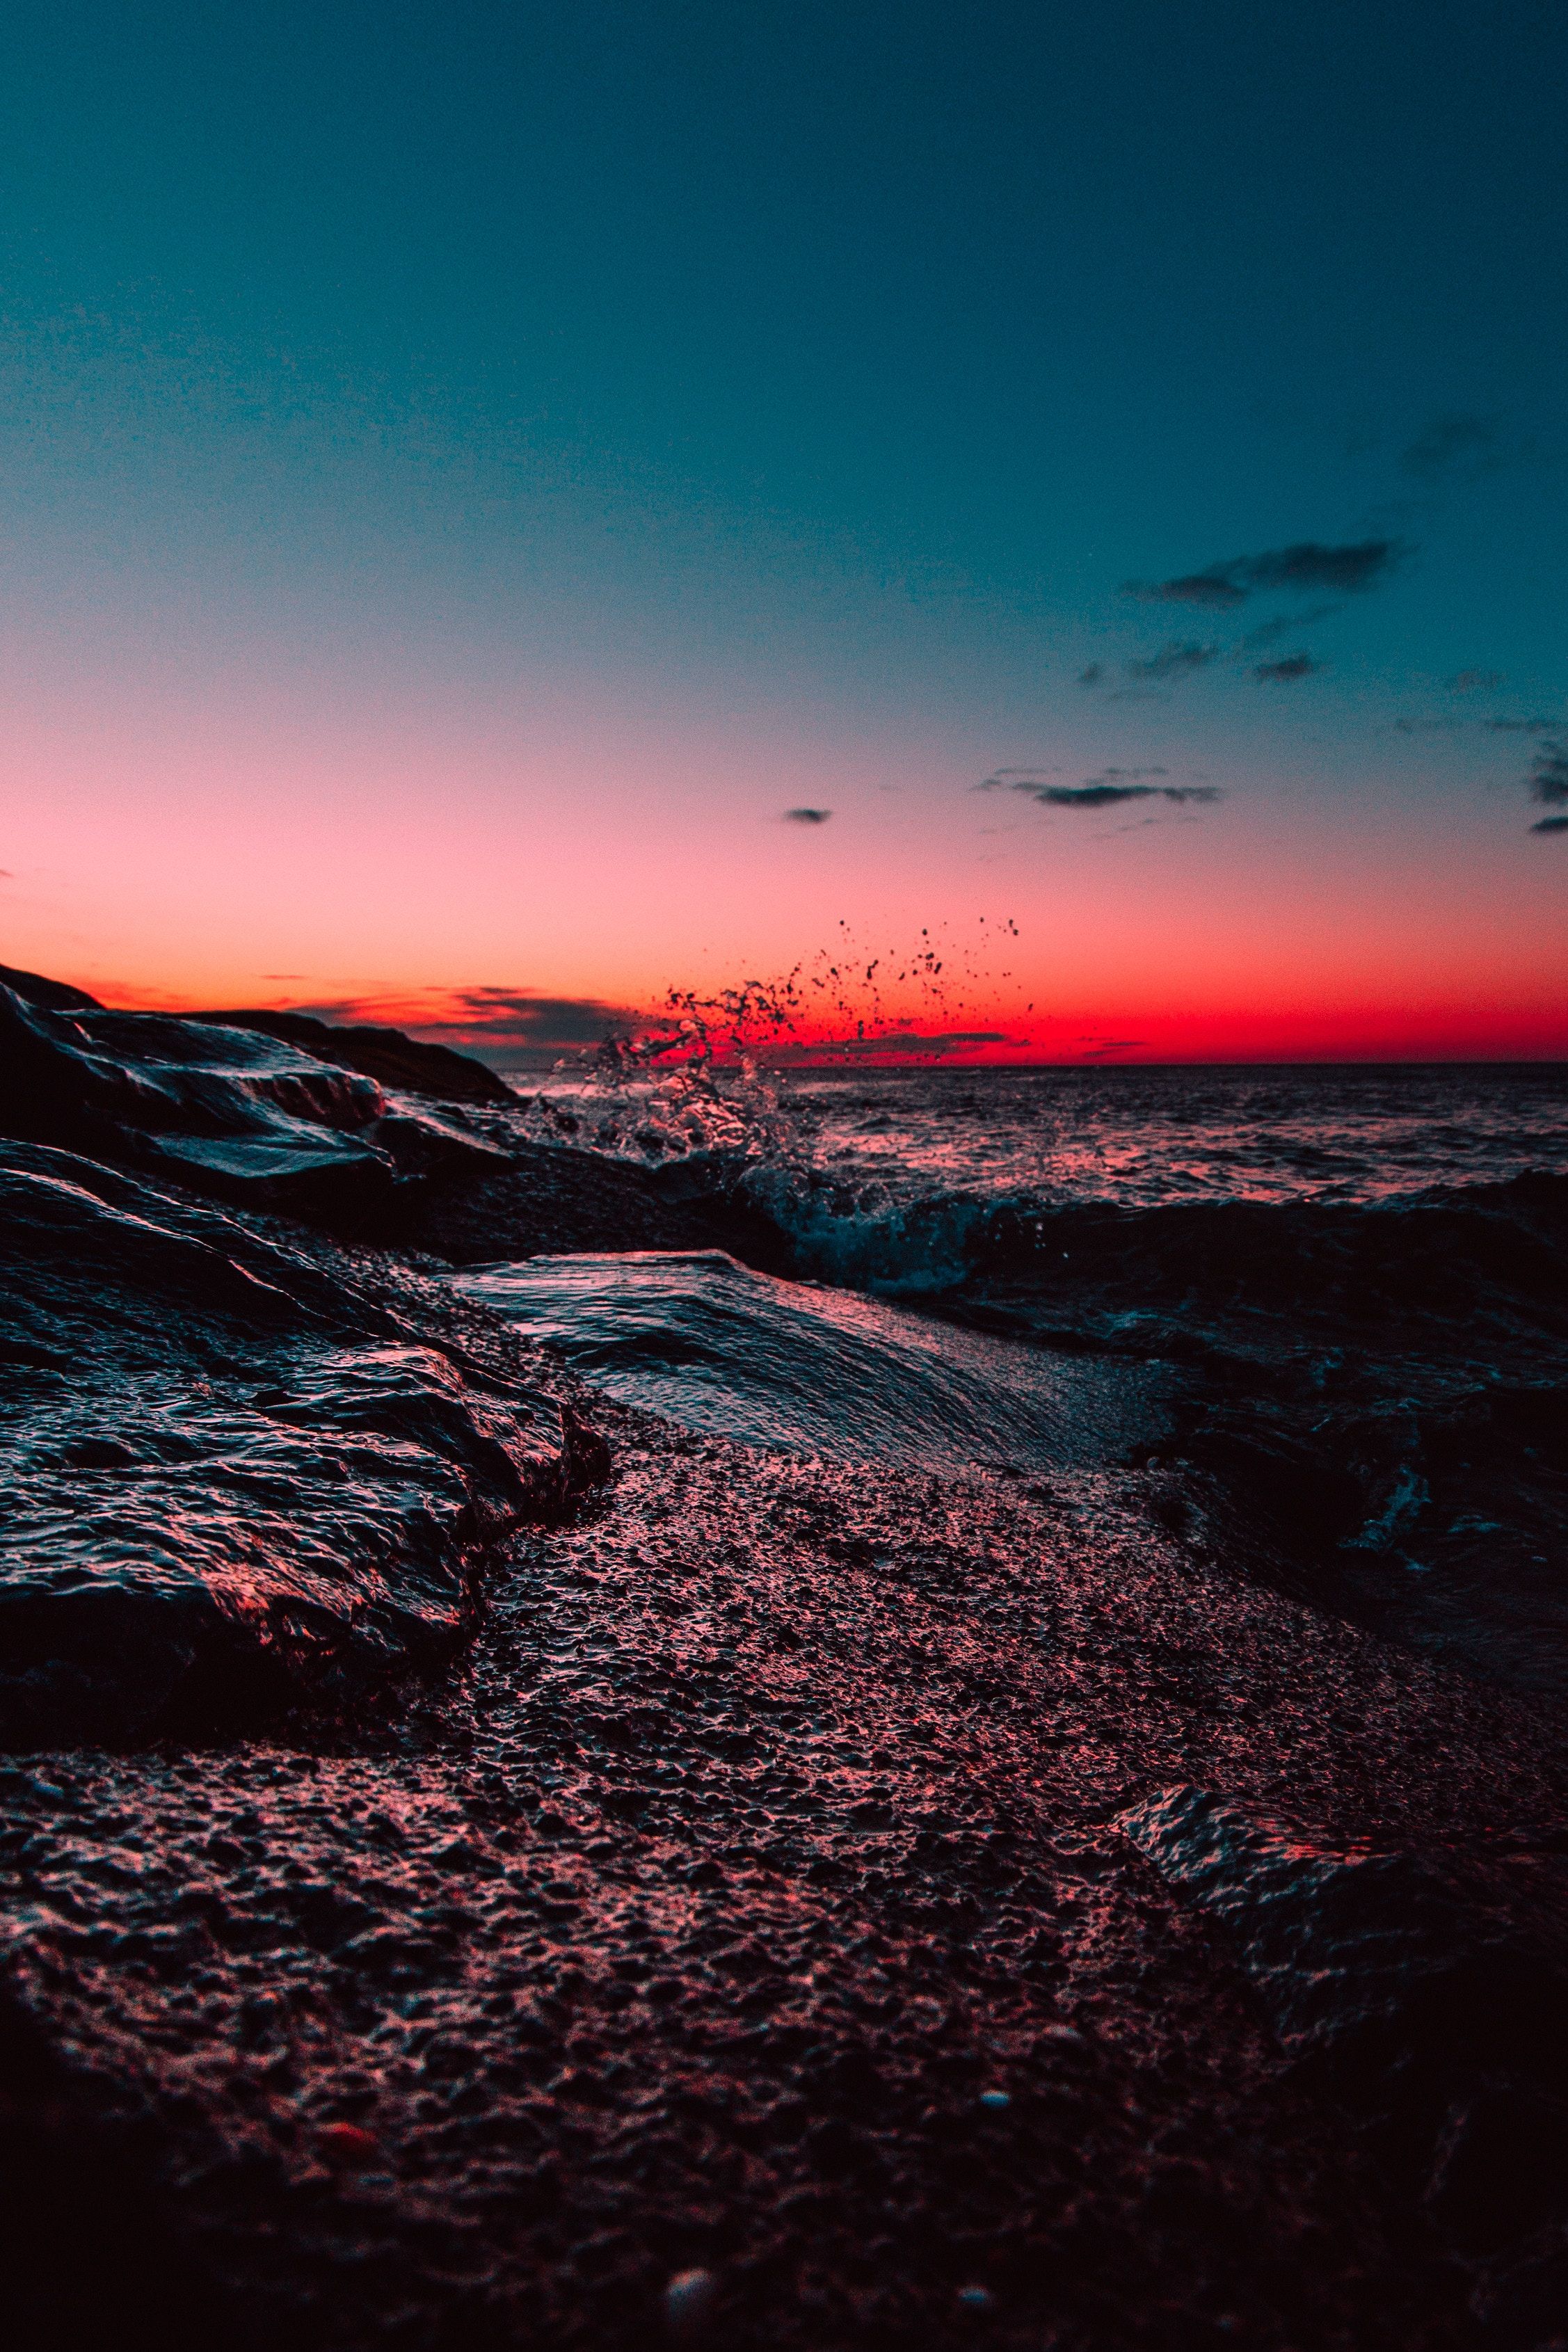 A sunset over the ocean with rocks in front - Beach, water, magic, sunset, beautiful, sunrise